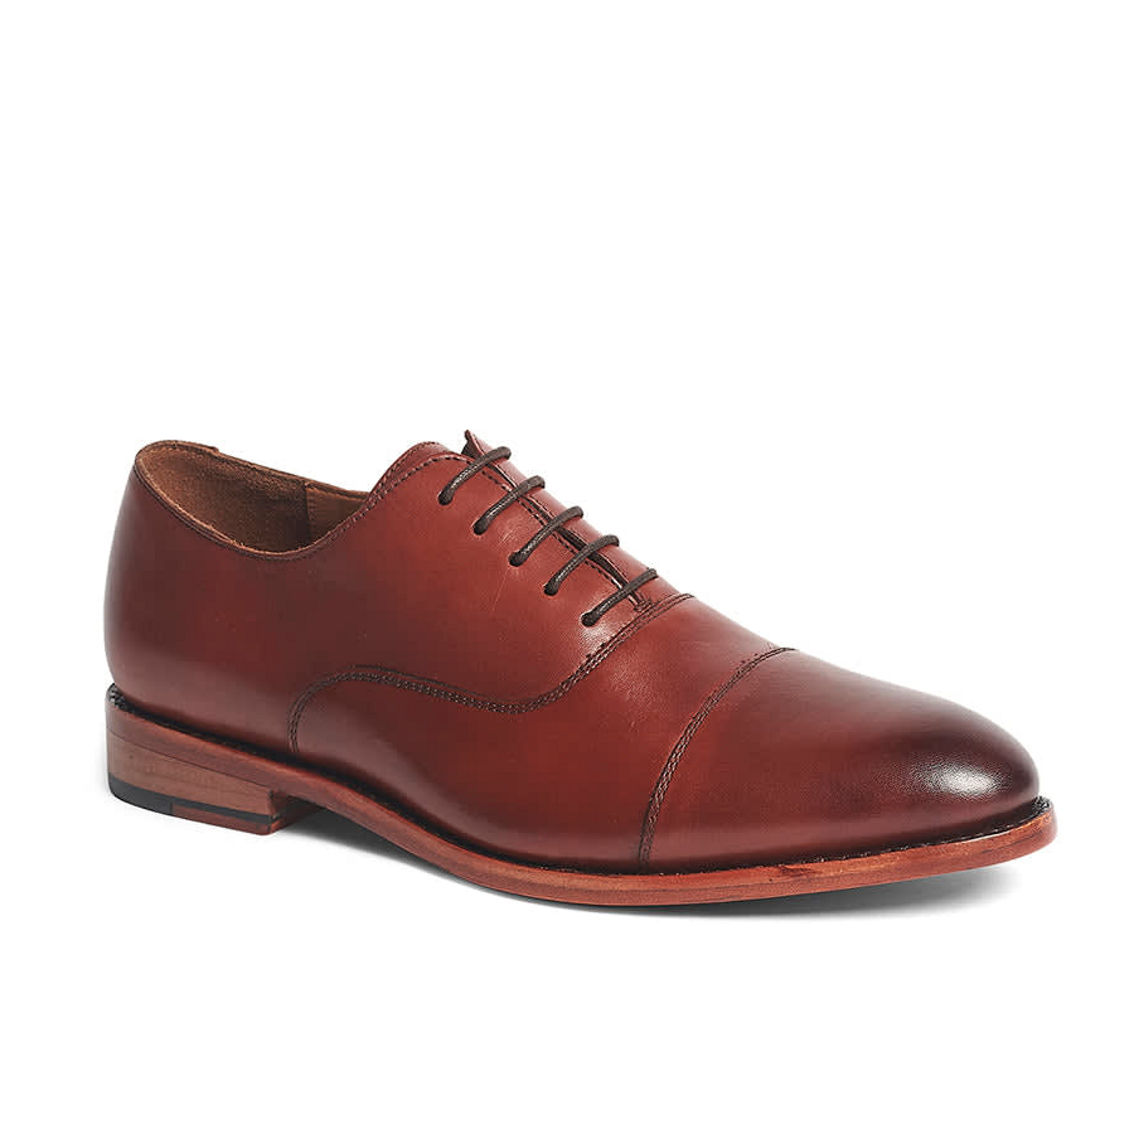 Anthony Veer Mens Clinton Cap-Toe Goodyear Welt Oxford Lace-up Dress Shoe - Image 2 of 5